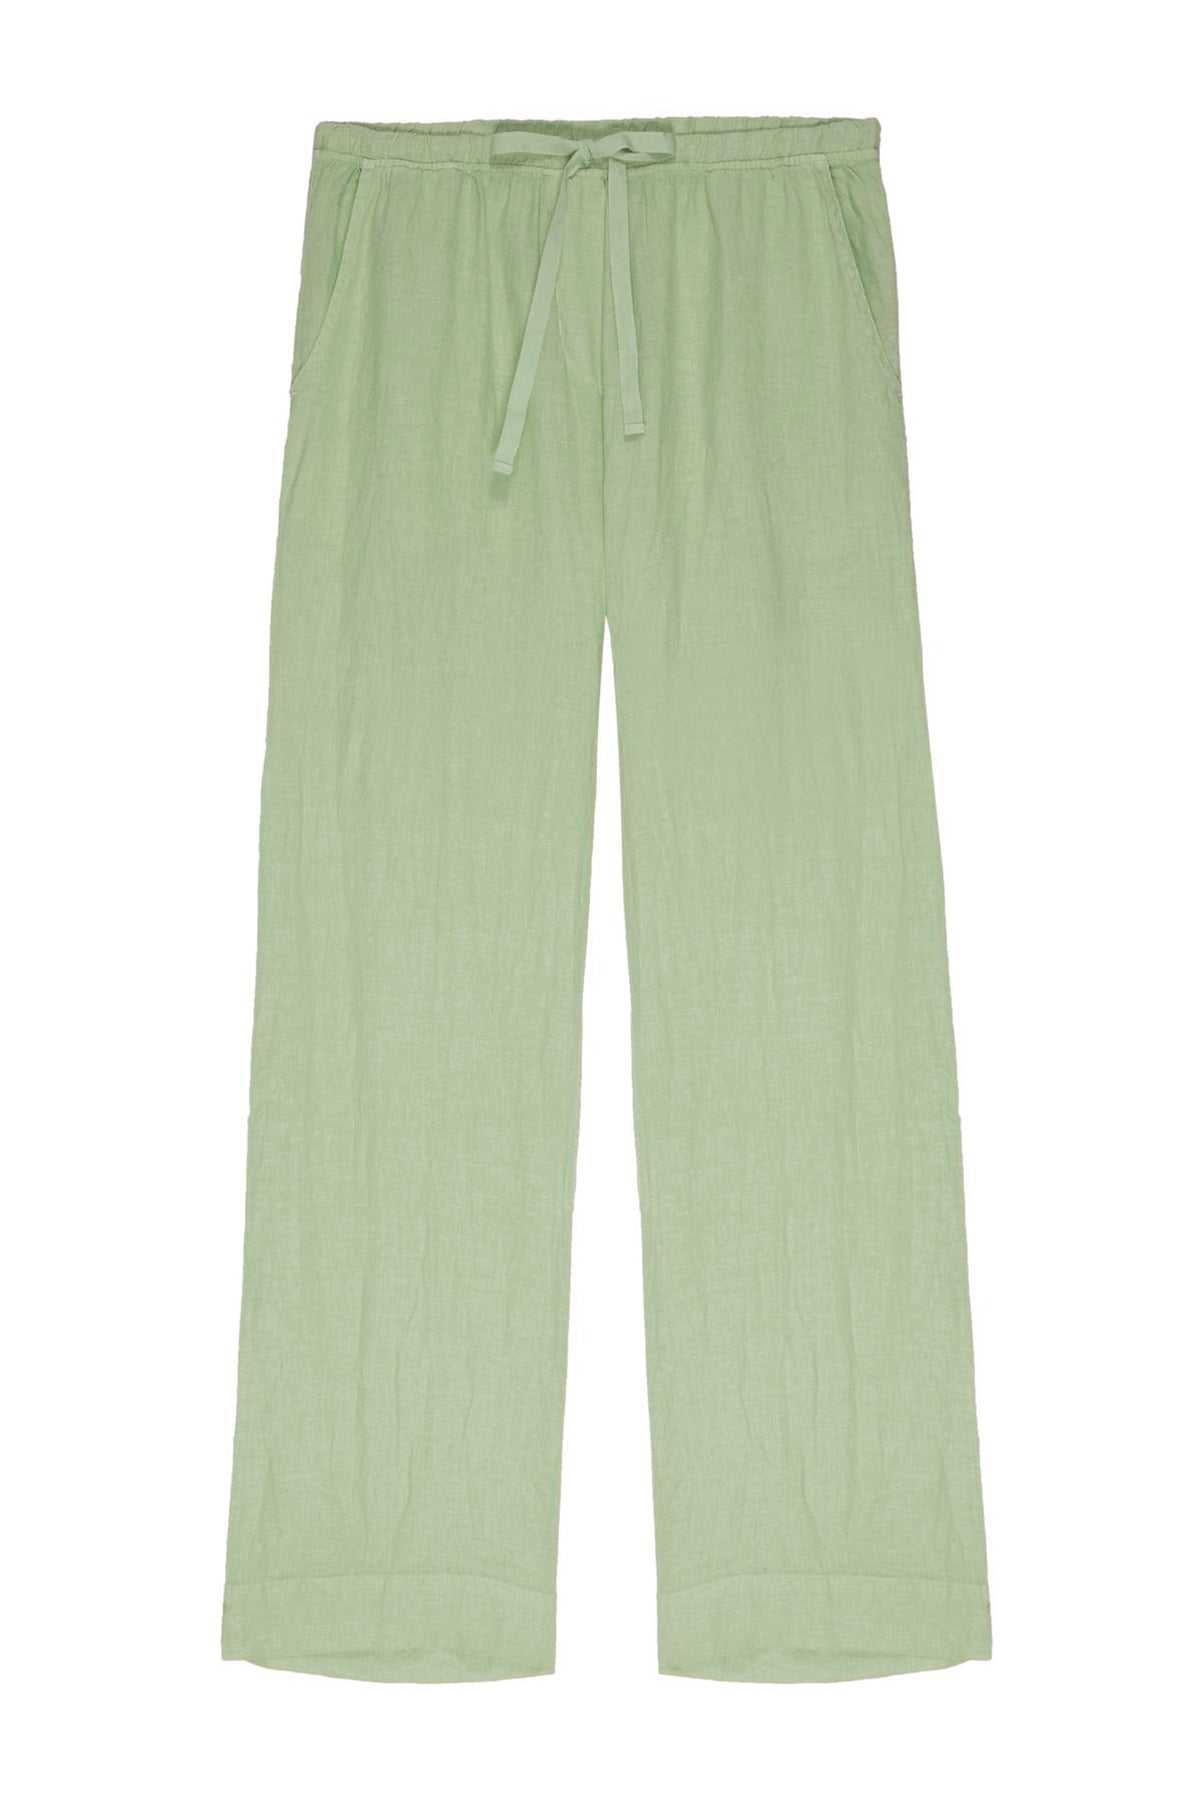 Velvet by Jenny Graham's PICO LINEN PANT, a relaxed fit light green linen pants with an elastic waist, displayed against a white background.-36580165419201